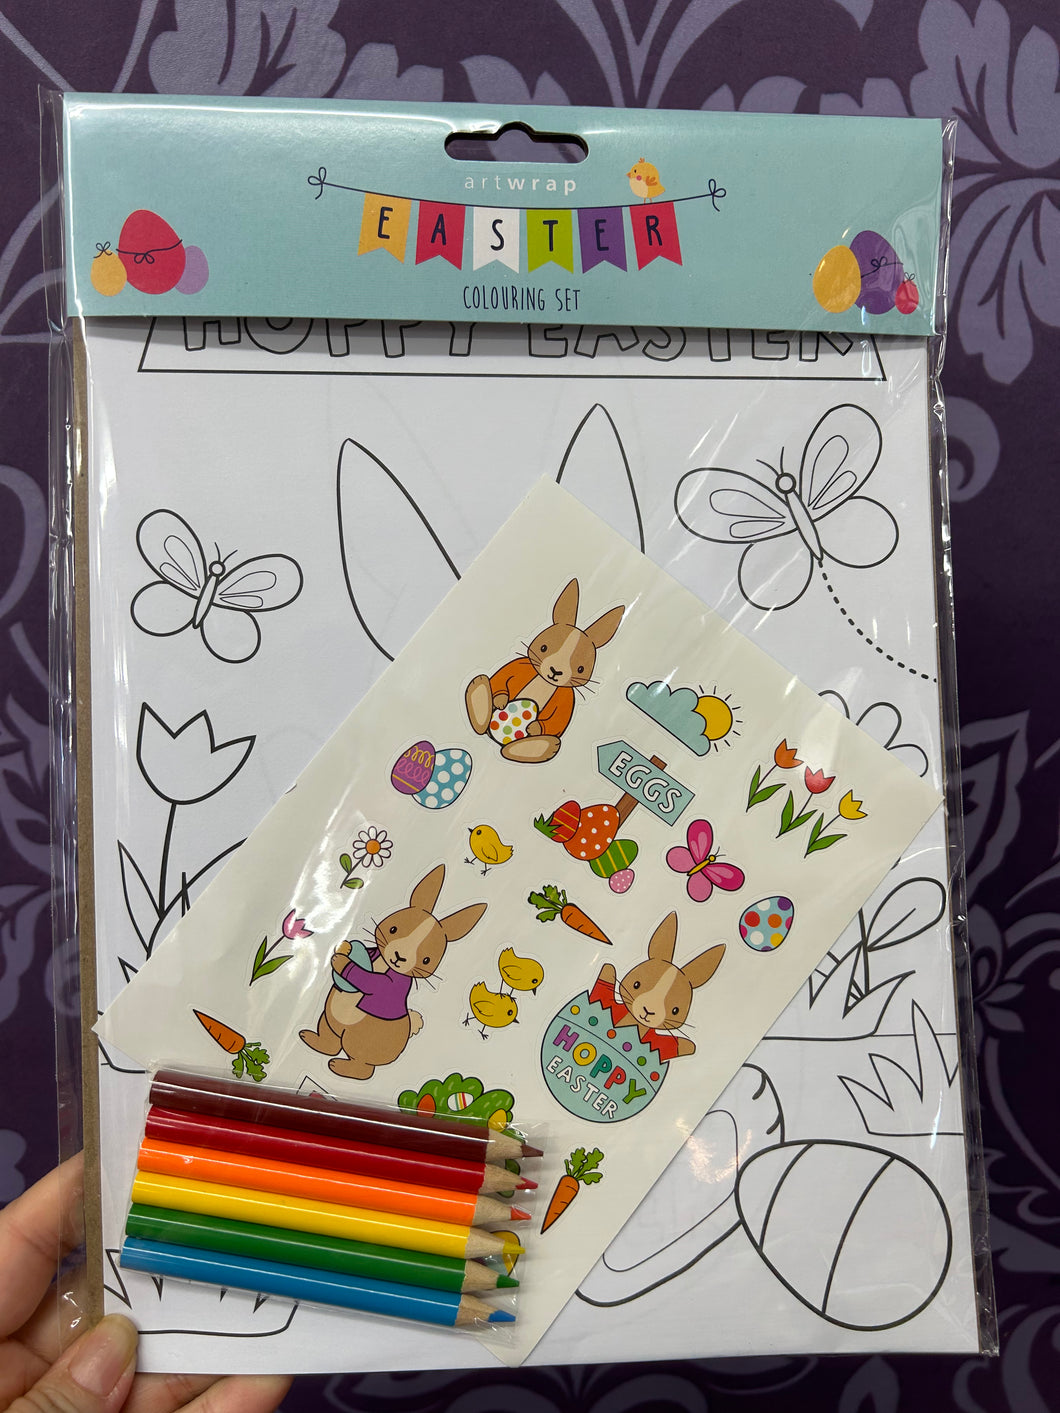 EASTER COLOURING SET A4 8SHEETS 6 PENCILS 1 STICKER